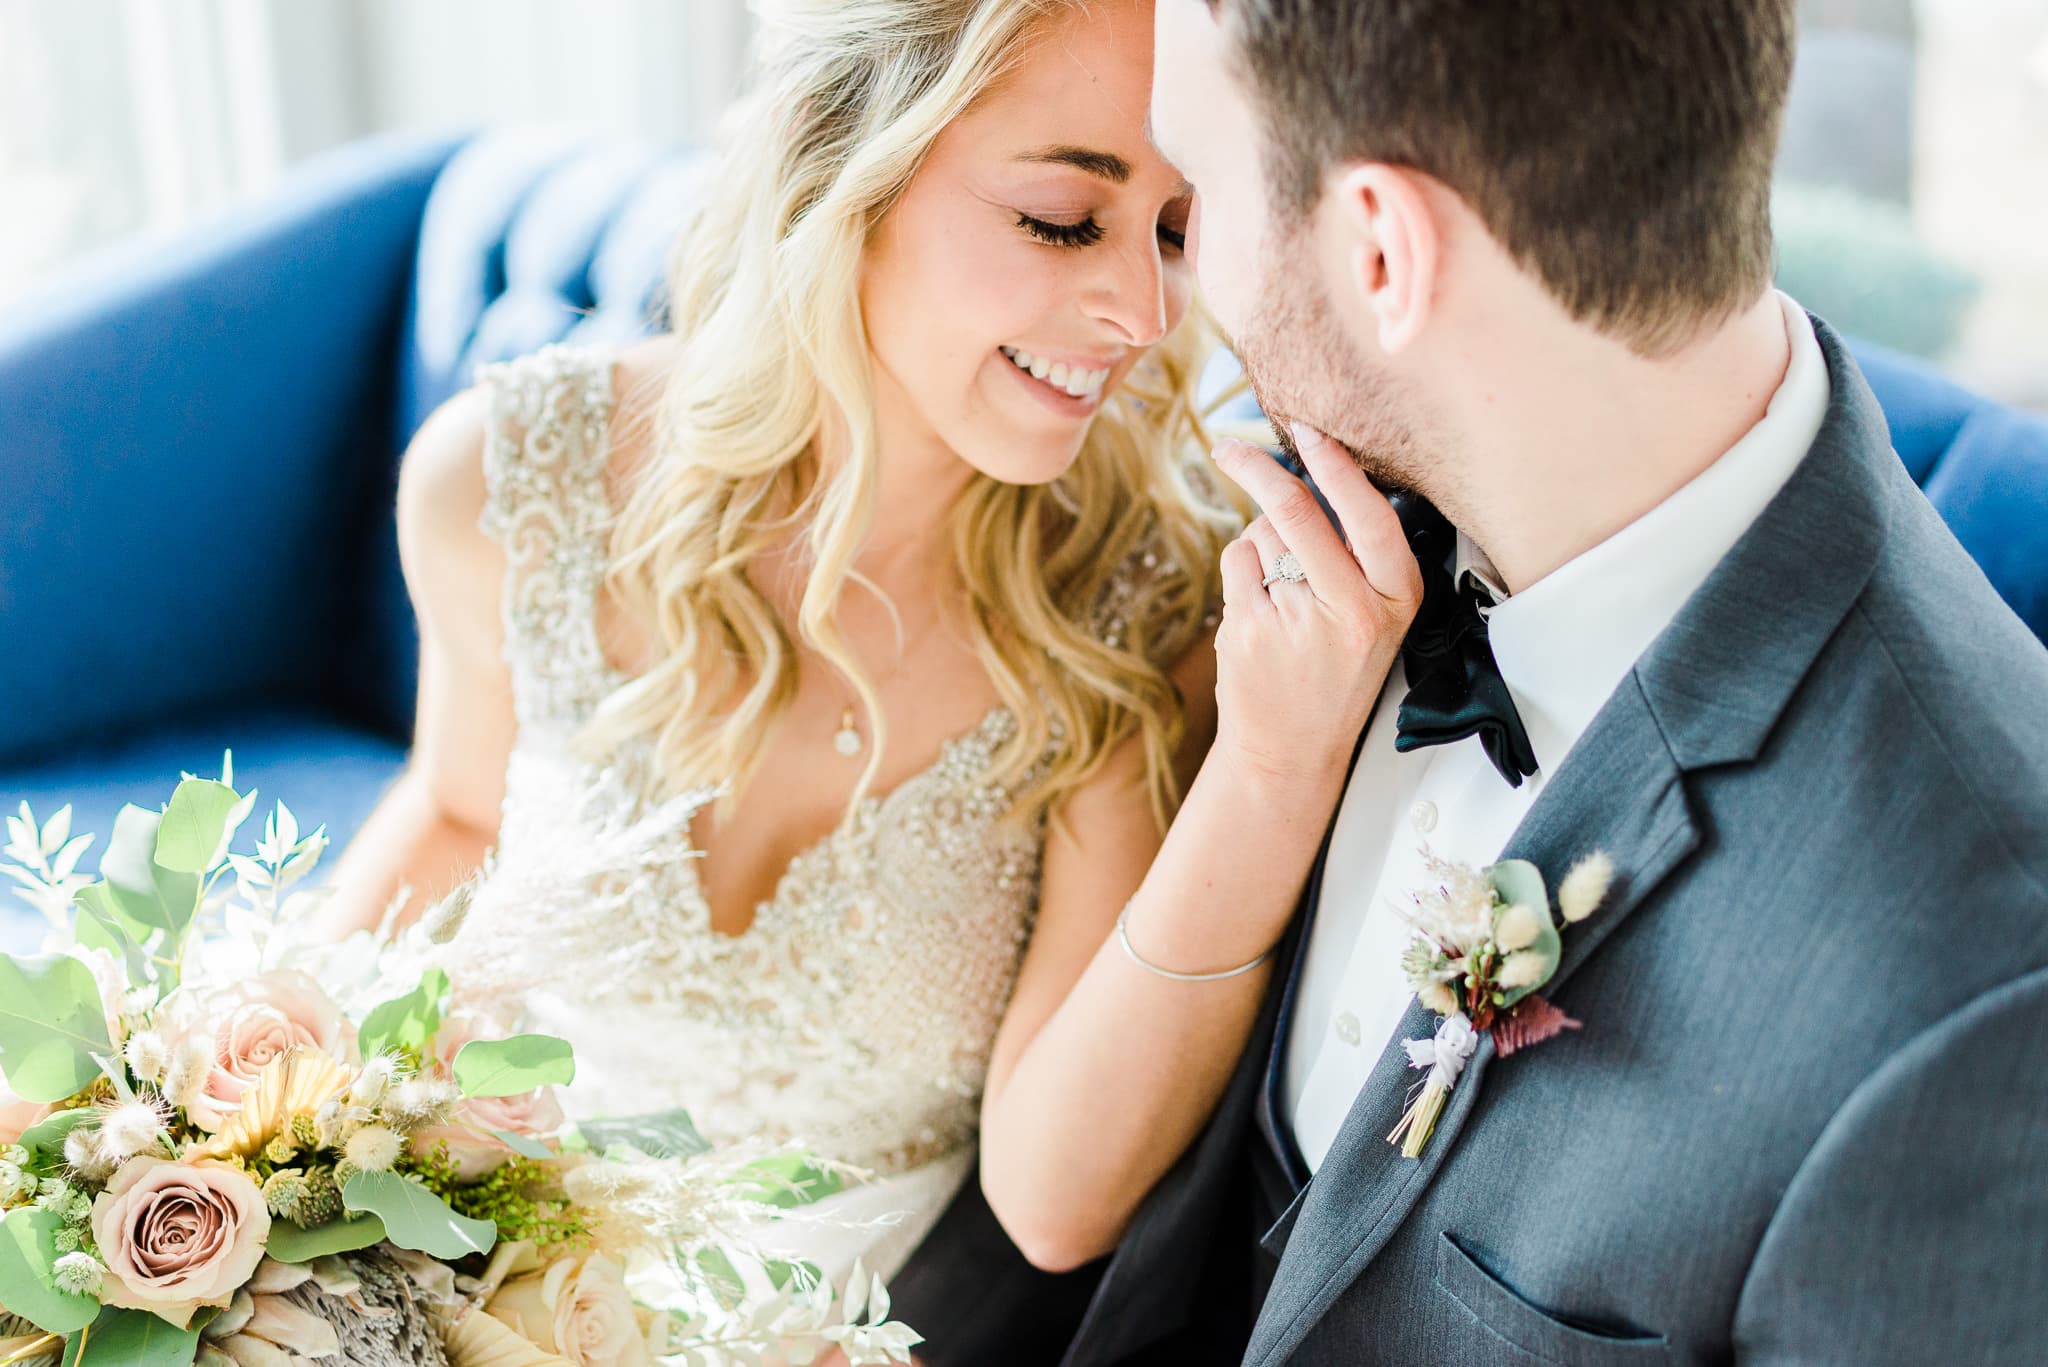 Styled Shoot Wedding The Venue Chattanooga 202113